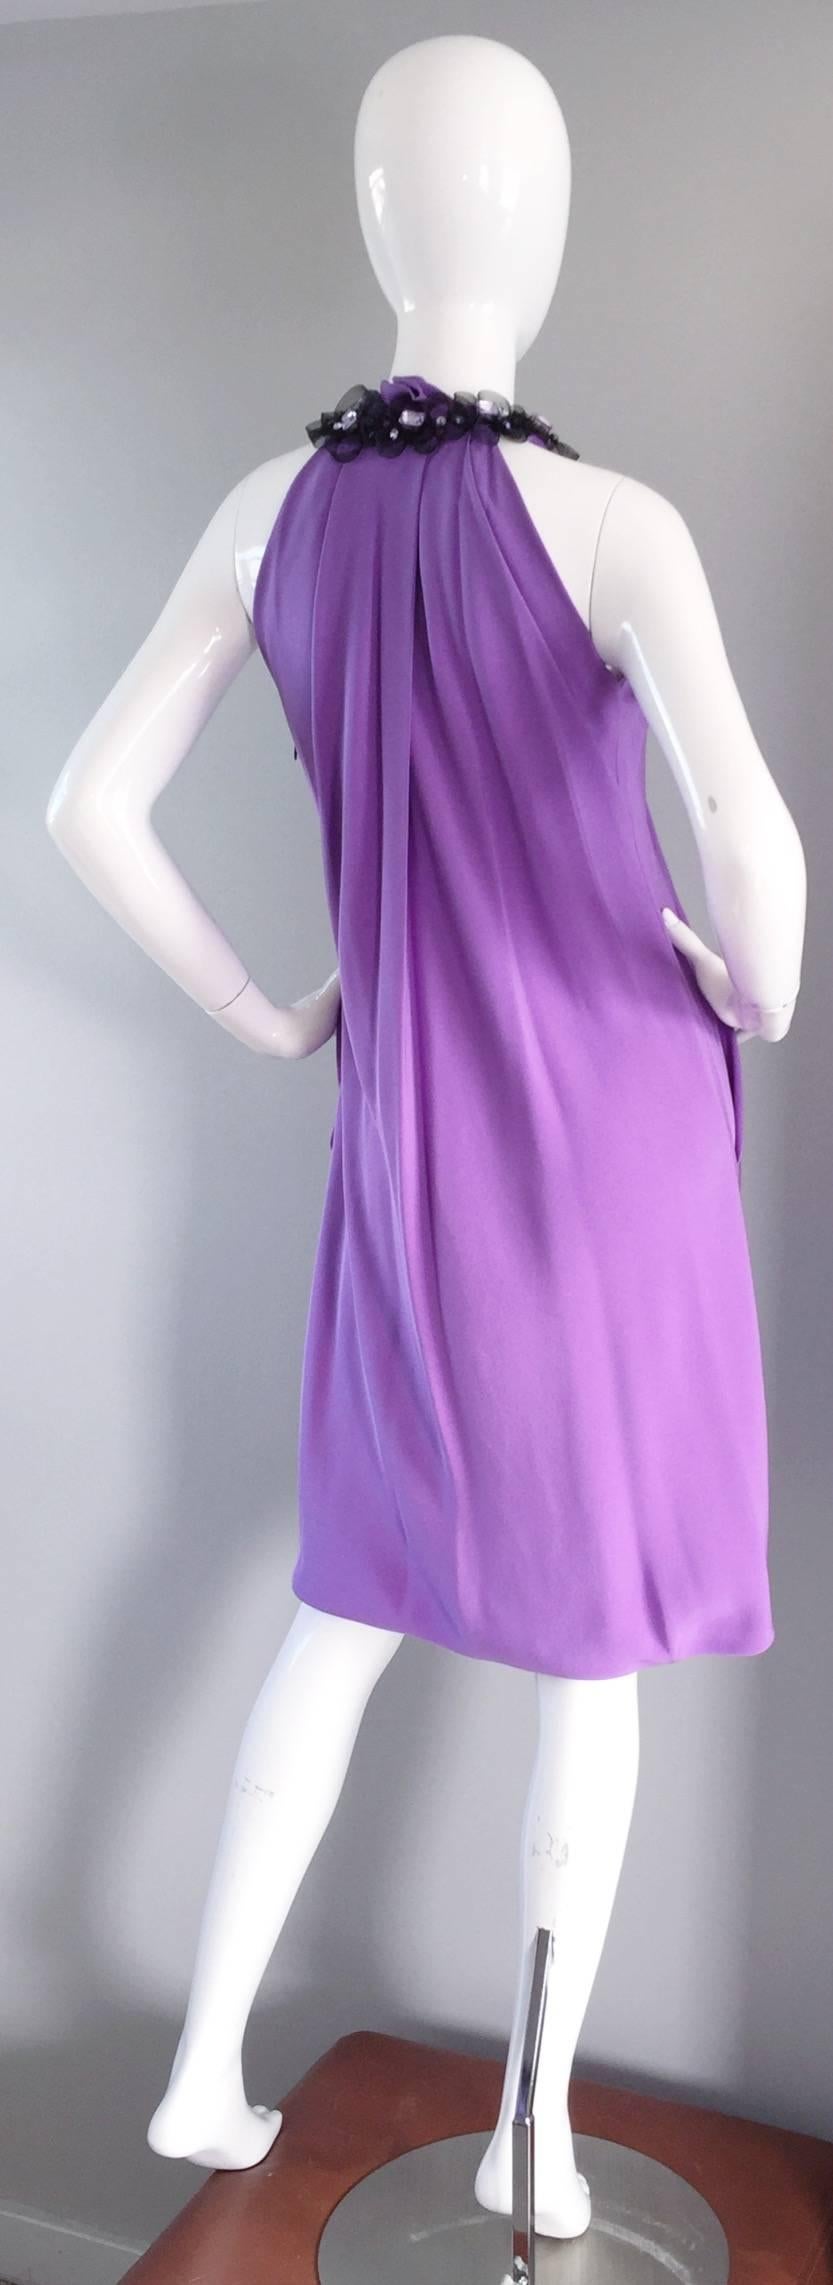 Gorgeous Pamella / Pamela Roland dress! Prettiest light purple lilac silk fabric, that drapes in all the right areas. Oversized rhinestone attached bib collar, with three hook-and-eye-closures. Wonderful Grecian feel. Pockets at both sides of the